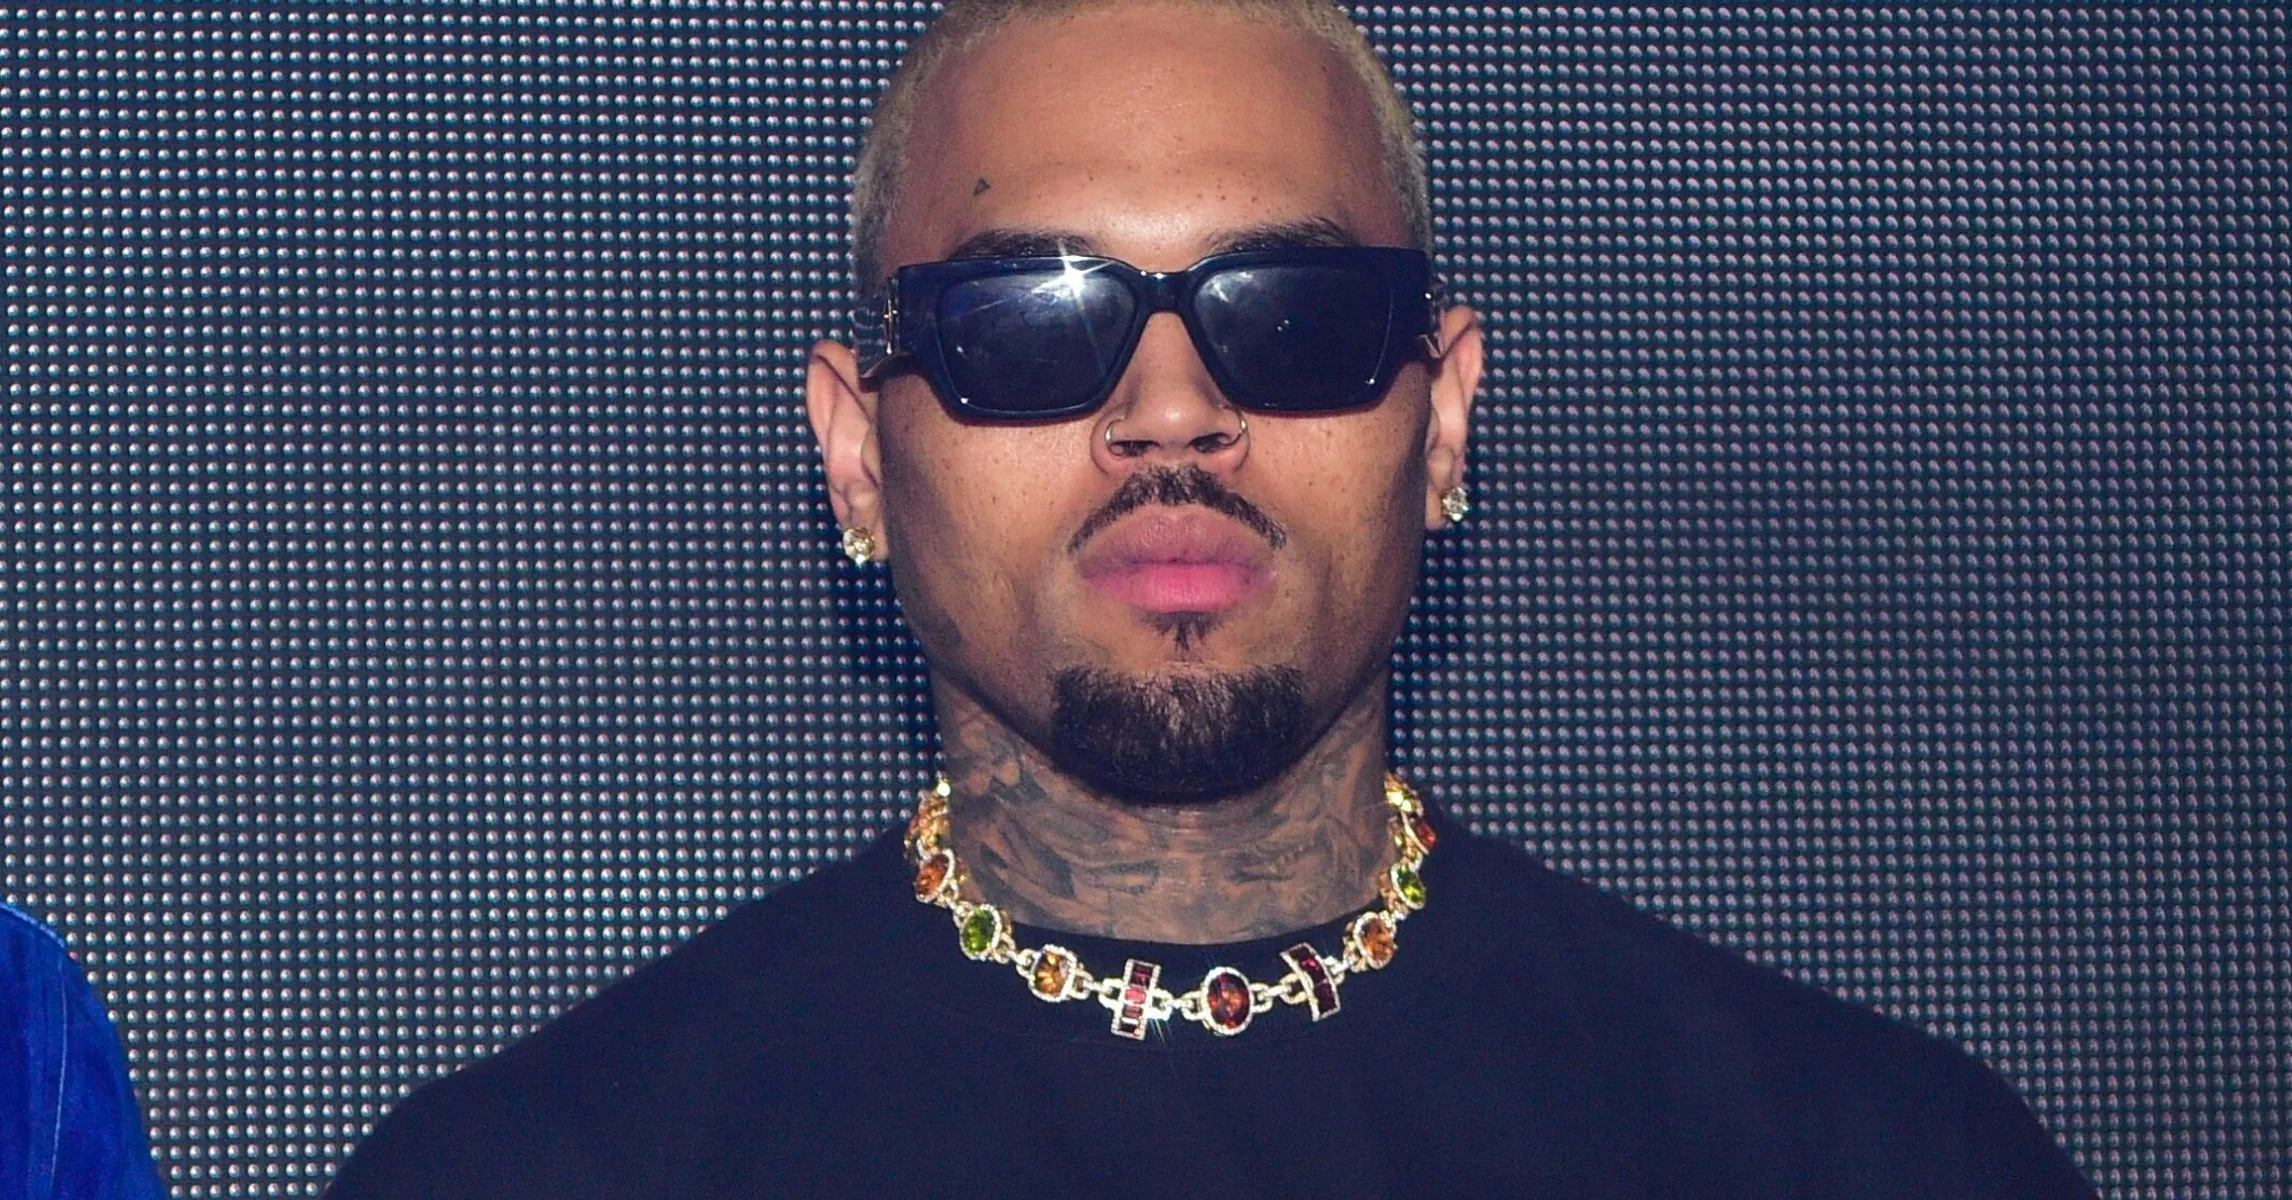 Chris Brown appears frustrated after another set malfunction during his “11:11” tour